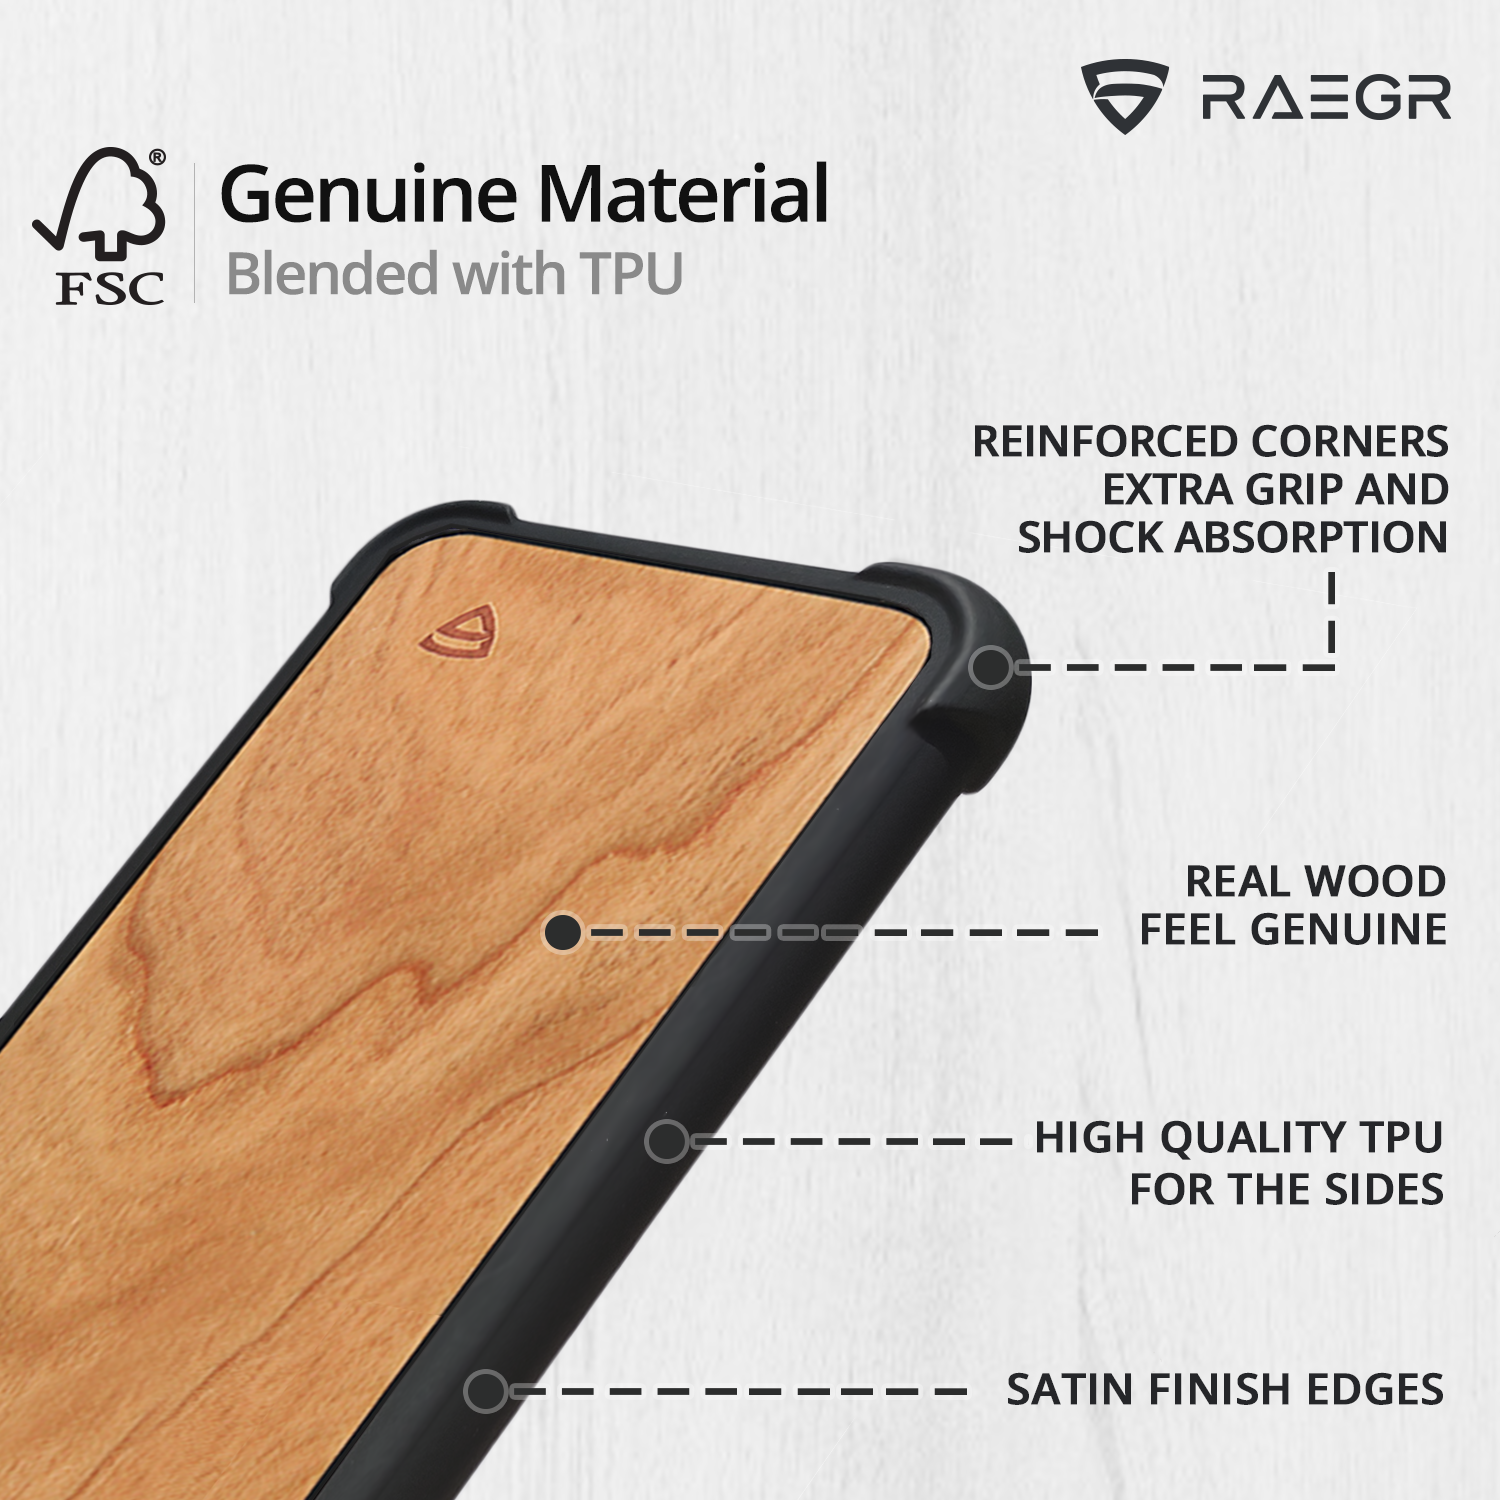 RAEGR iPhone 11 Pro Elements Armor Protective Case/Cover with Real Wood